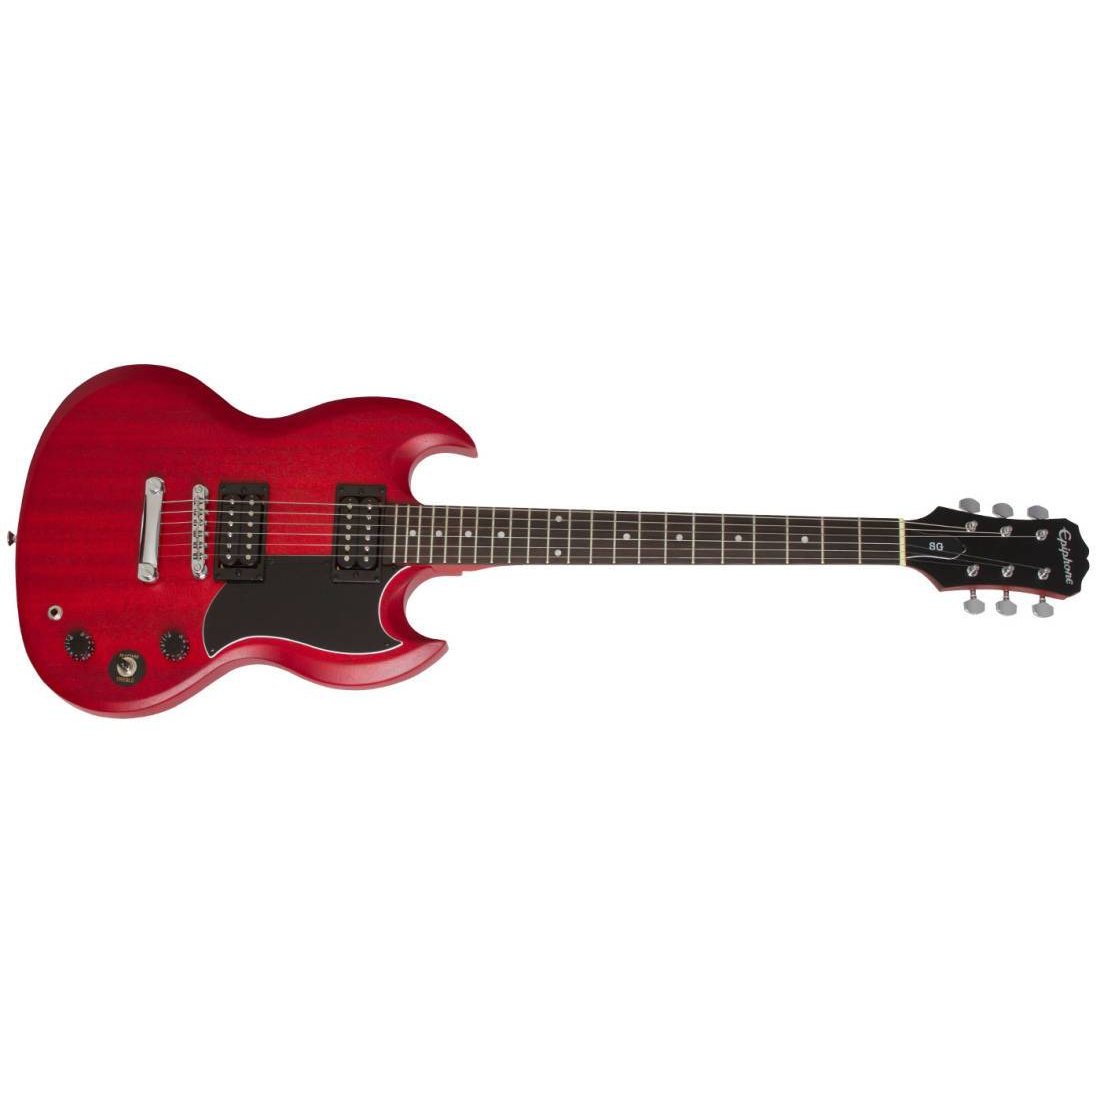 Epiphone EGGSVVCCH SG Special VE Electric Guitar-Vintage Cherry-Music World Academy